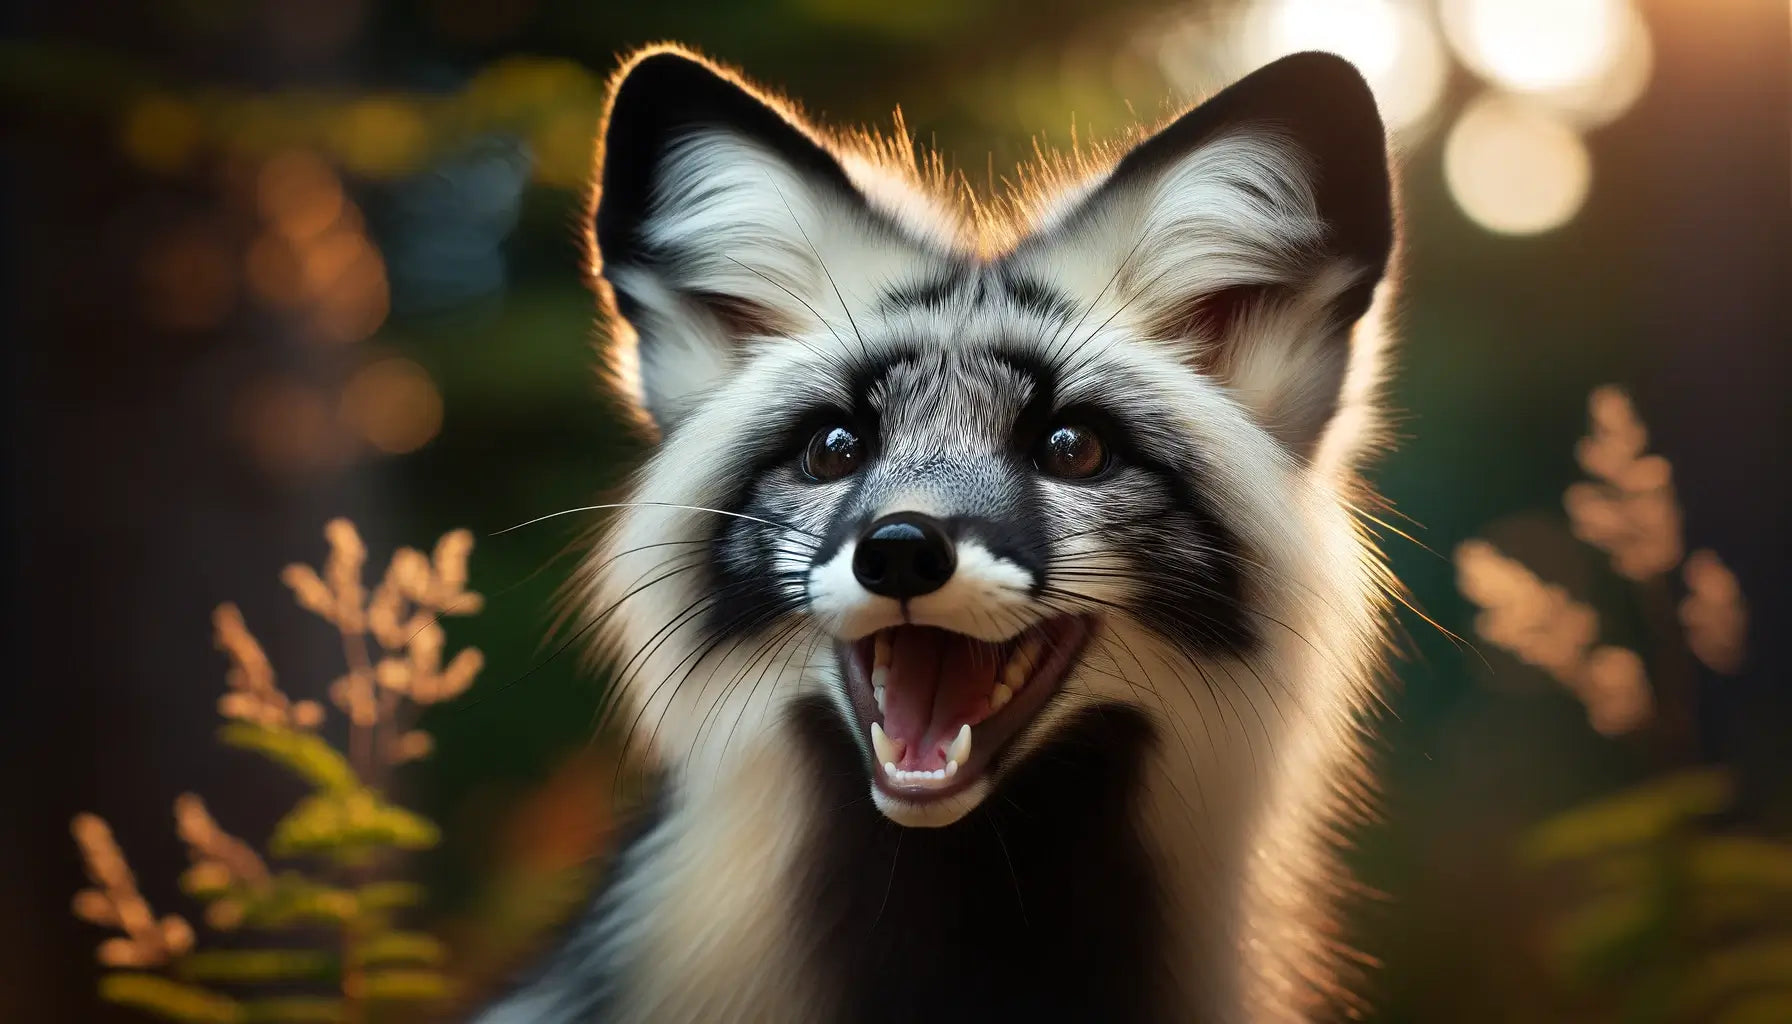 A Canadian marble fox caught in a candid moment, likely with its mouth open, showcasing the characteristic black markings that resemble a mask.